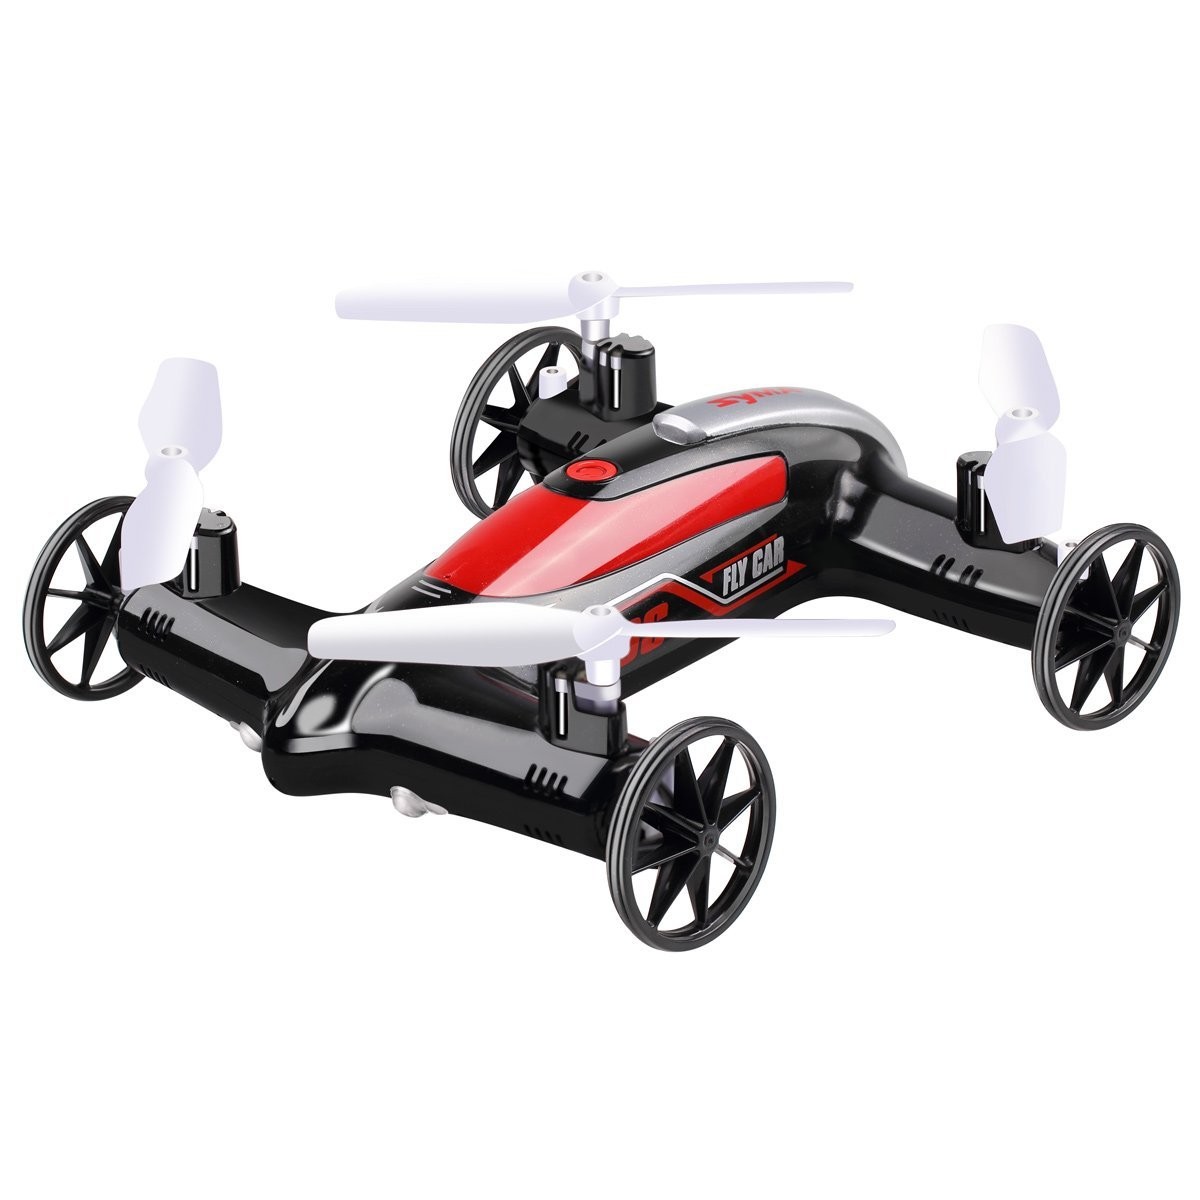 You are currently viewing Azimport X9S Black X9S 2.4G & 4CH 6-Axis RC Fly Car Nerf Quadcopter Mini Drone – Black